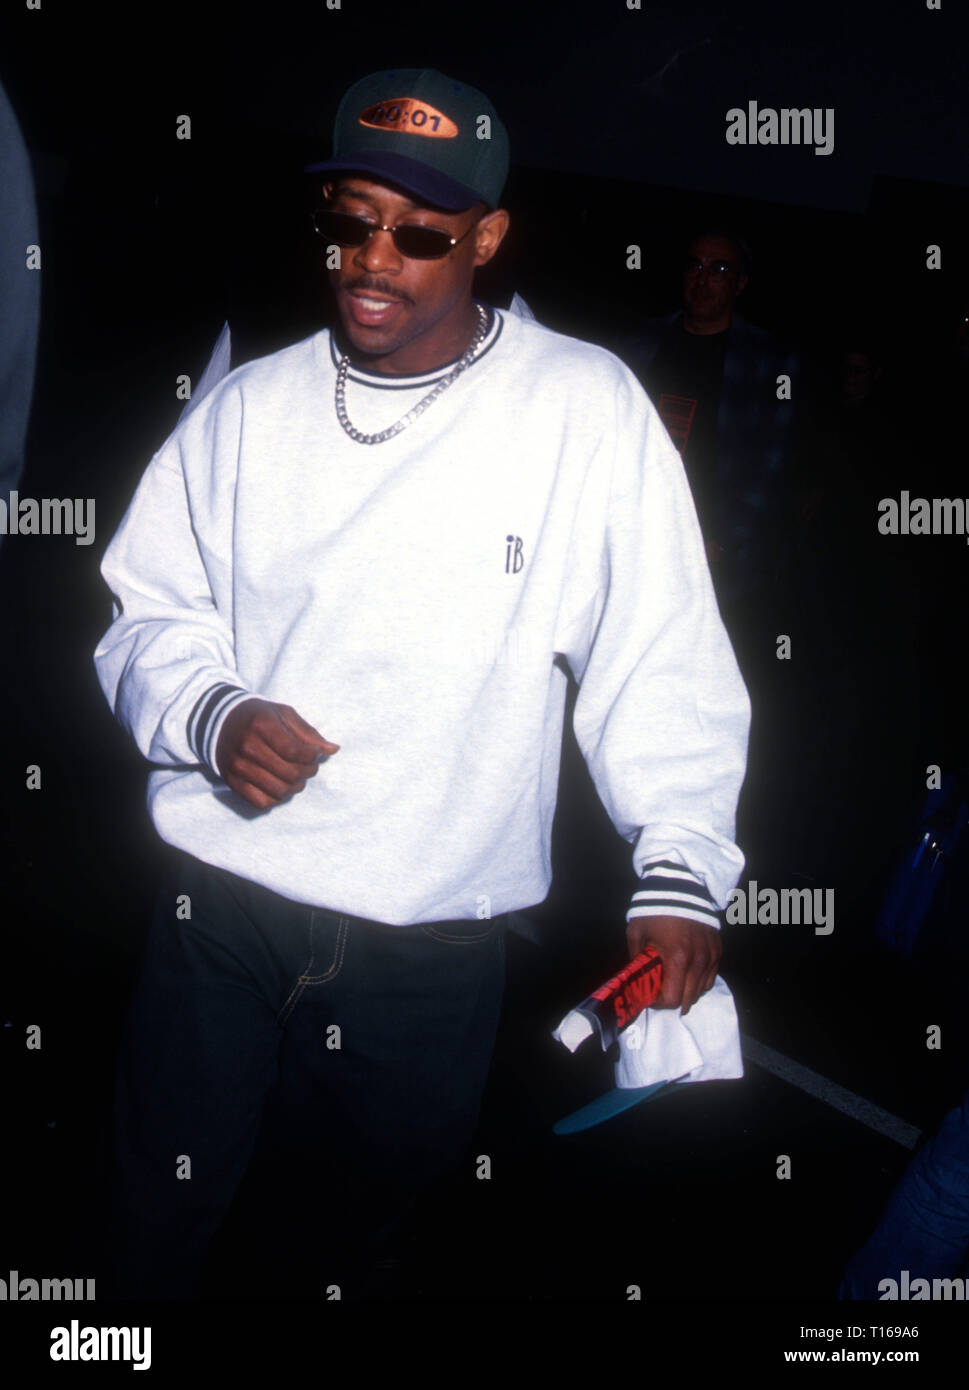 LOS ANGELES, CA - MARCH 5: Actor/comedian Martin Lawrence attends Fight with Boxer Oscar De La Hoya, who won WBO super featherweight title by a RTD 10 against boxer Jimmi Bredahl on March 5, 1994 at Olympic Auditorium in Los Angeles, California. Photo by Barry King/Alamy Stock Photo Stock Photo